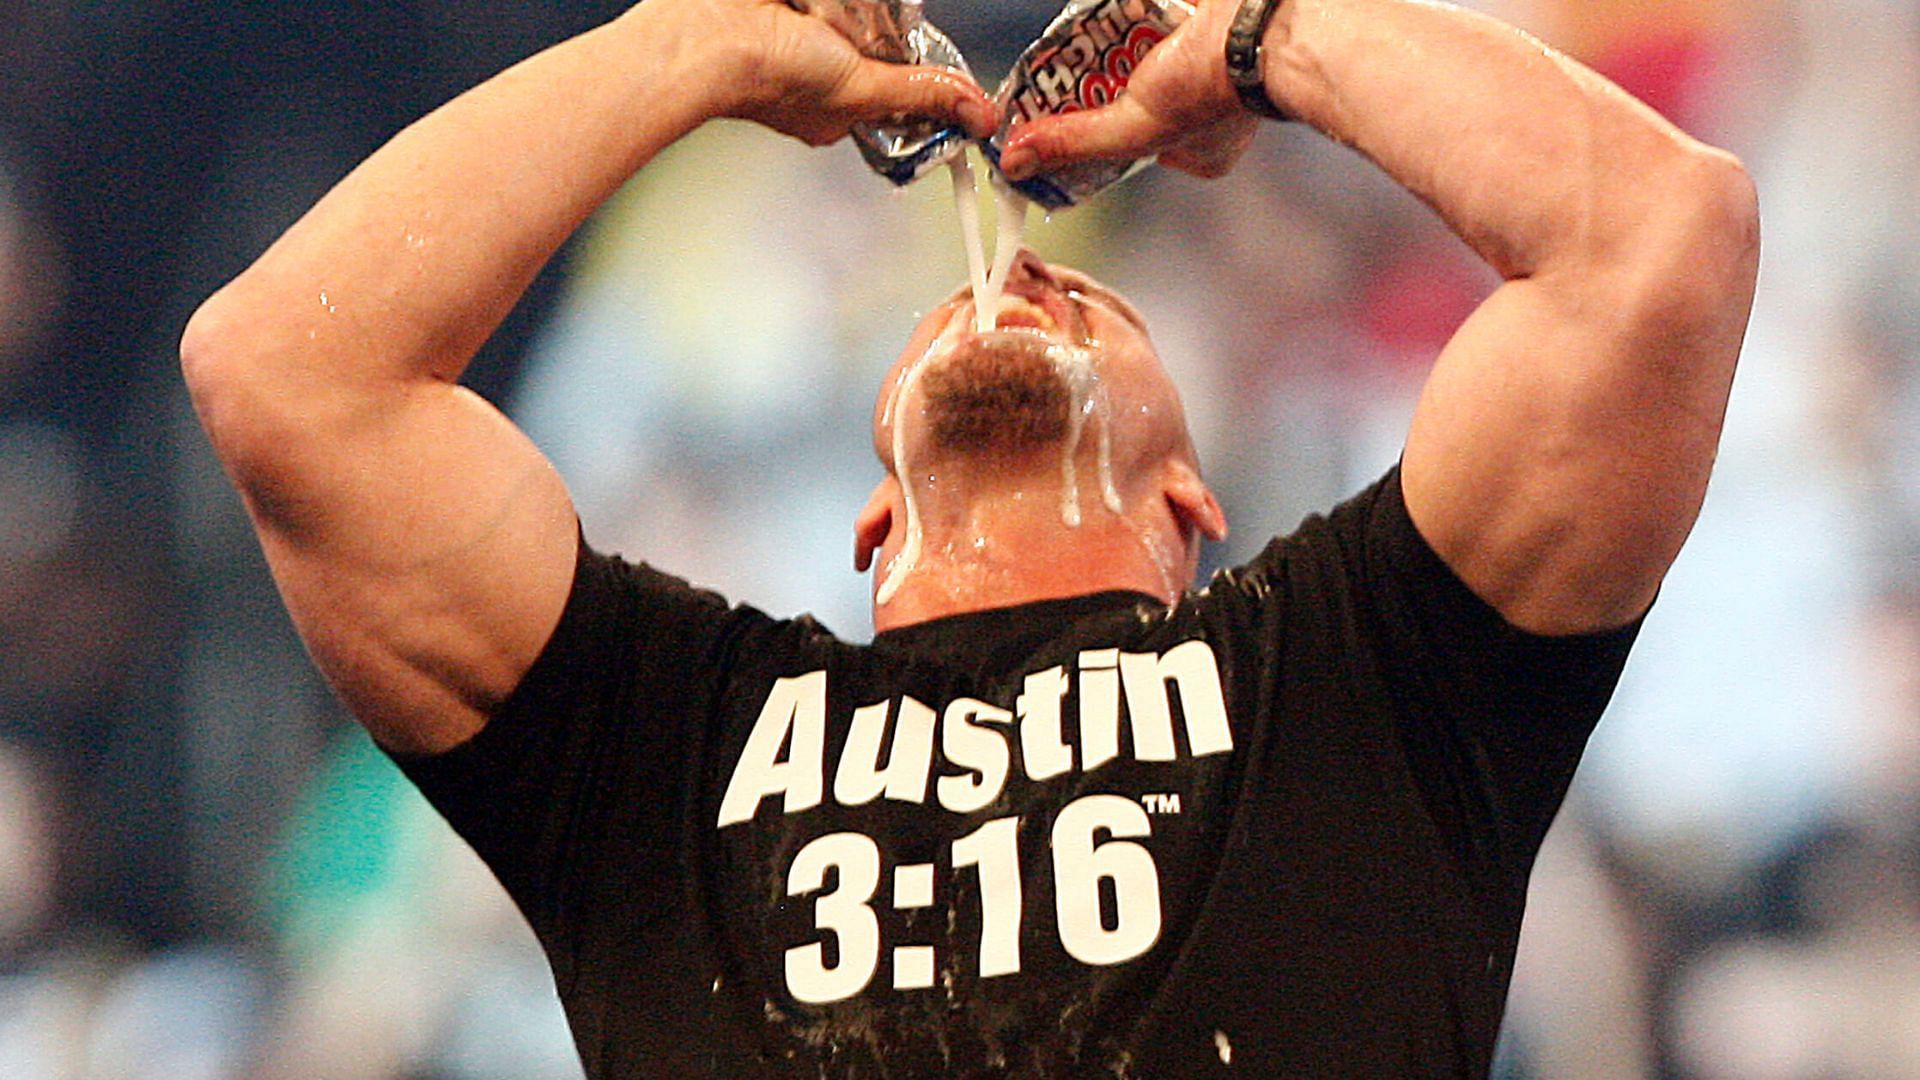 Stone Cold Steve Austin enjoying a couple of cold ones